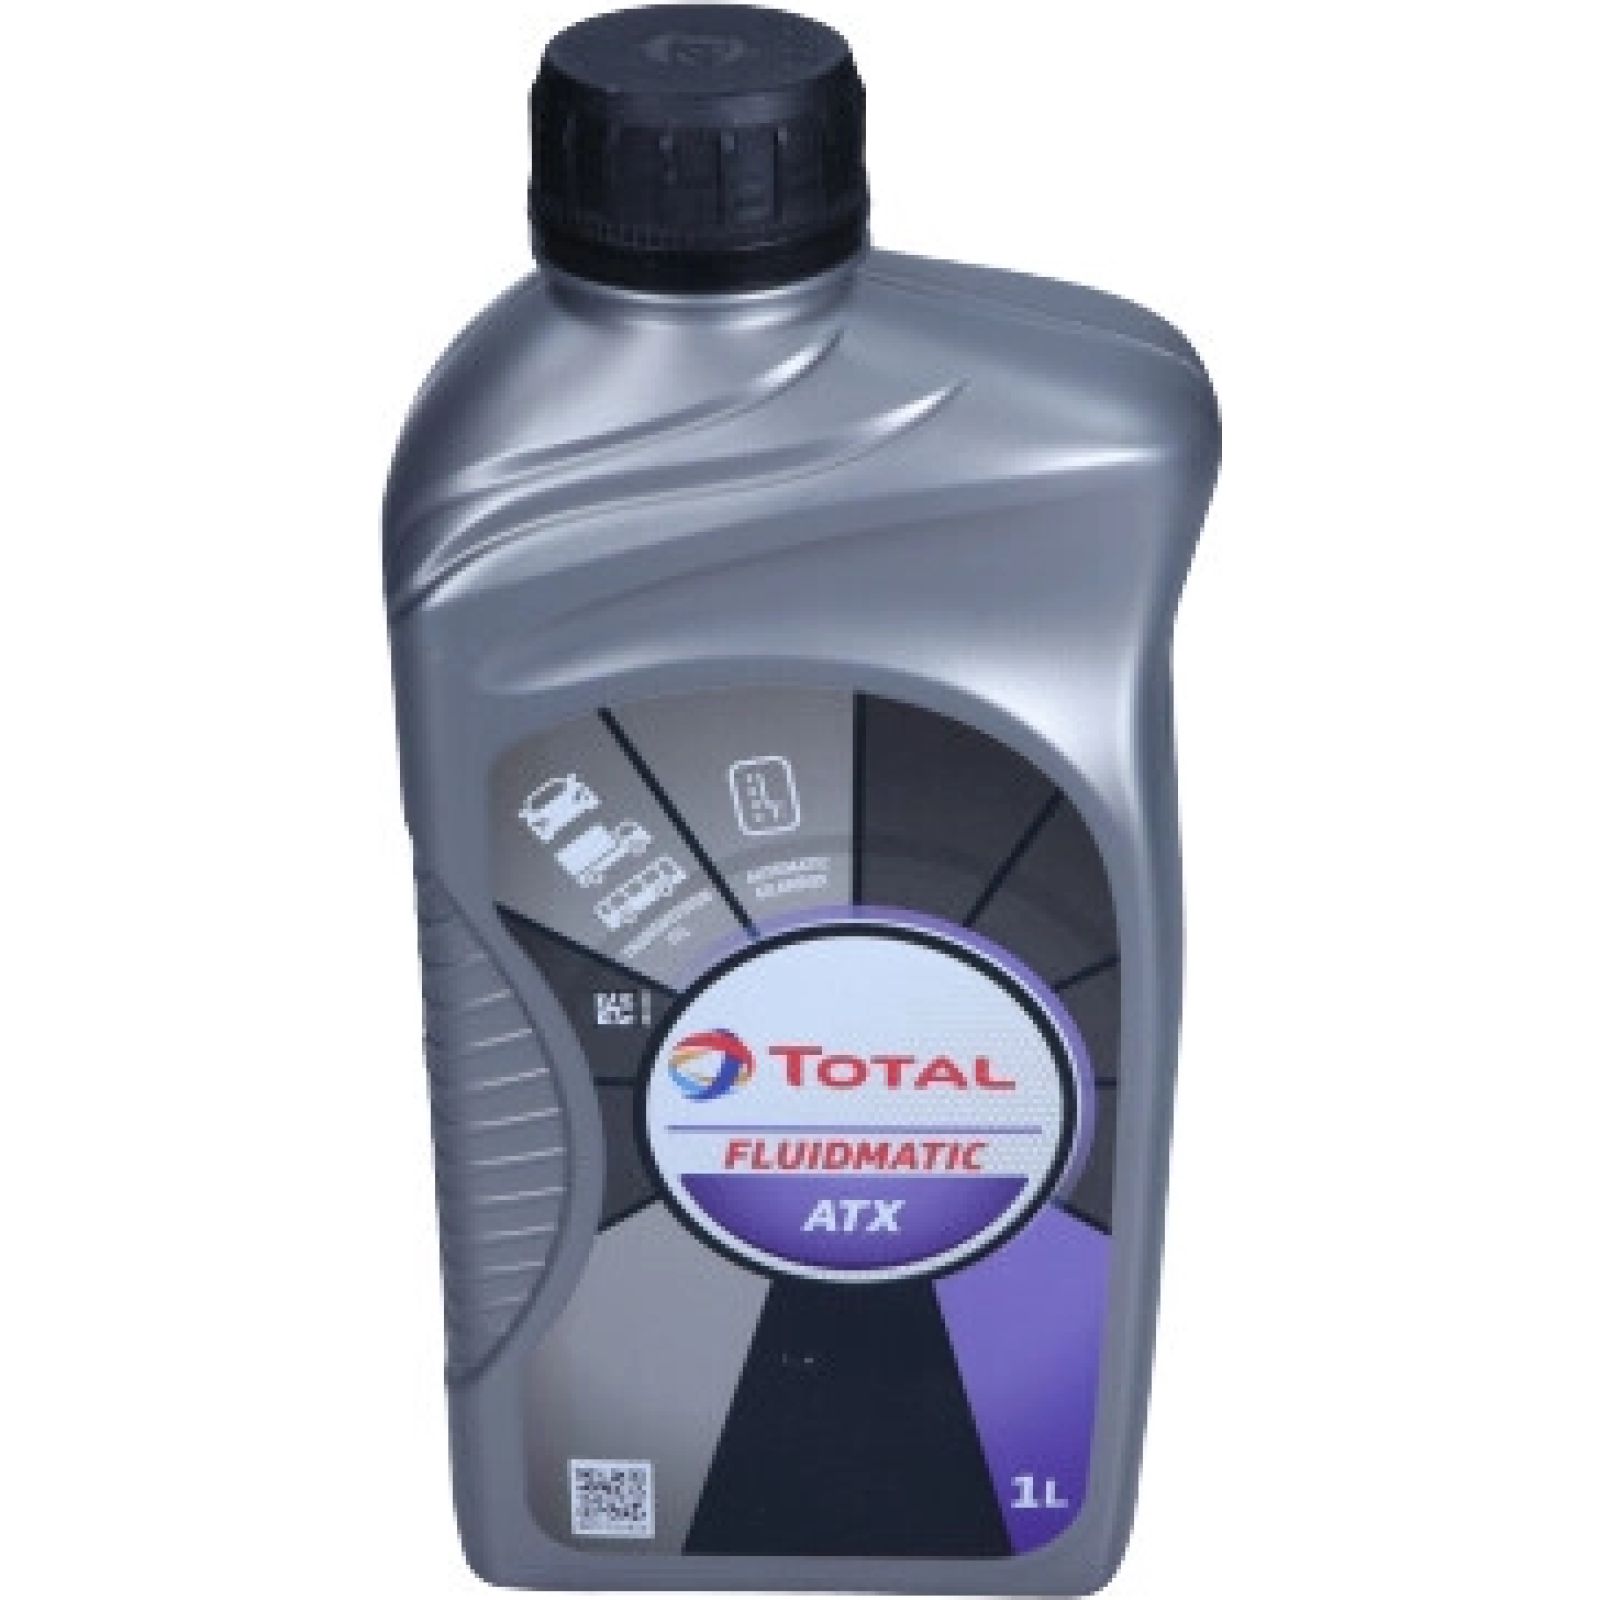 https://www.autoteile-store.at/img/product/total-fluidmatic-atx-automatikgetriebeoel-1-liter-2213755-548387/ad55abb687a59e6cf1b334c981730a76_1600.jpg